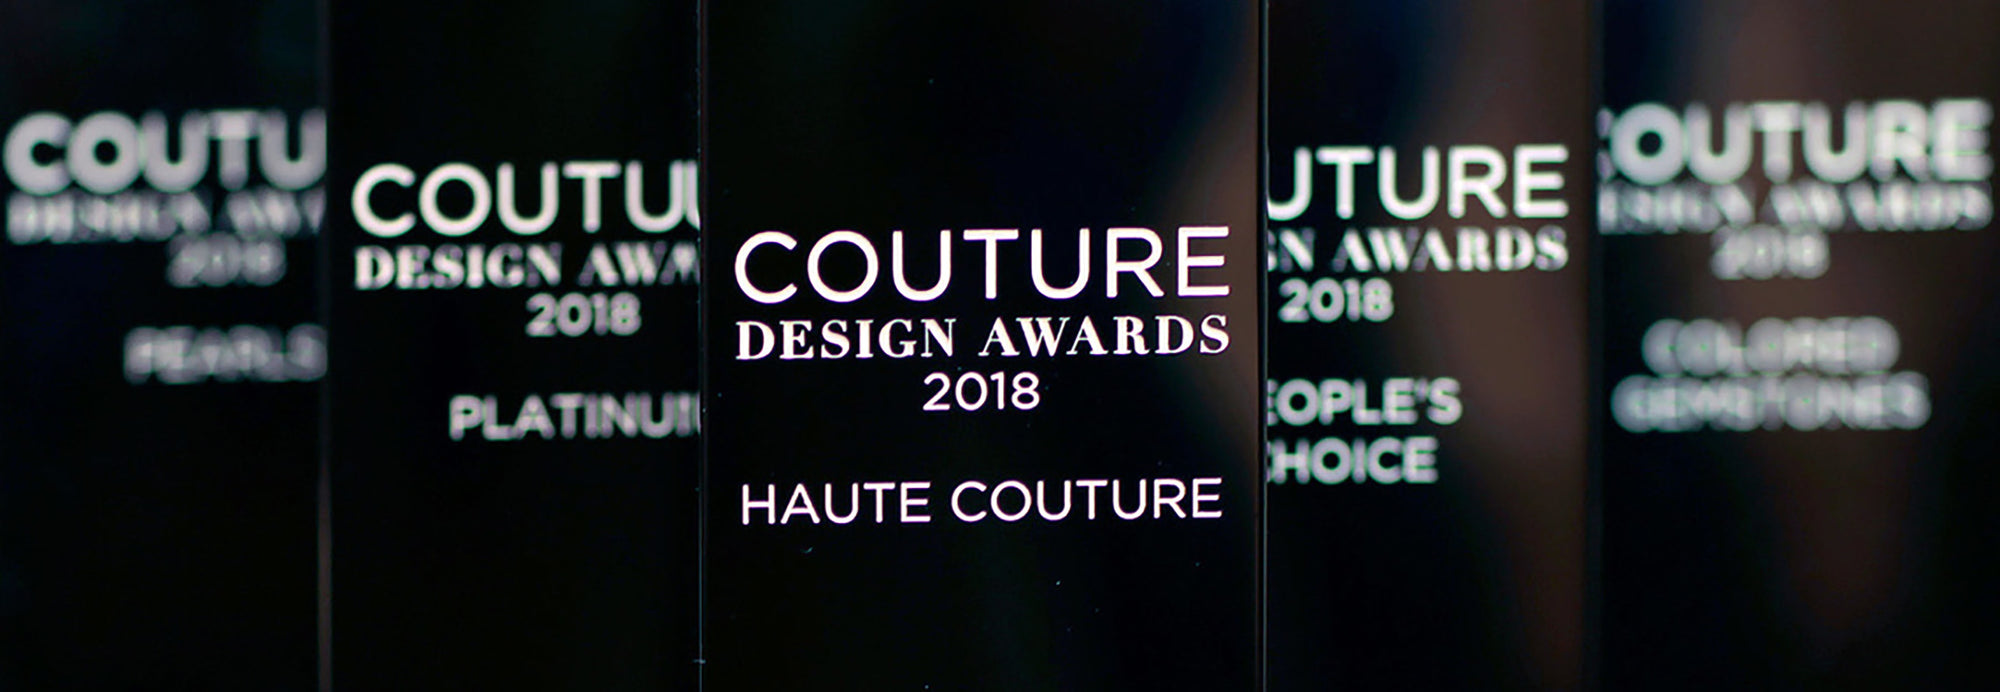 Julez Bryant wins 2018 Couture “Peoples Choice” Award